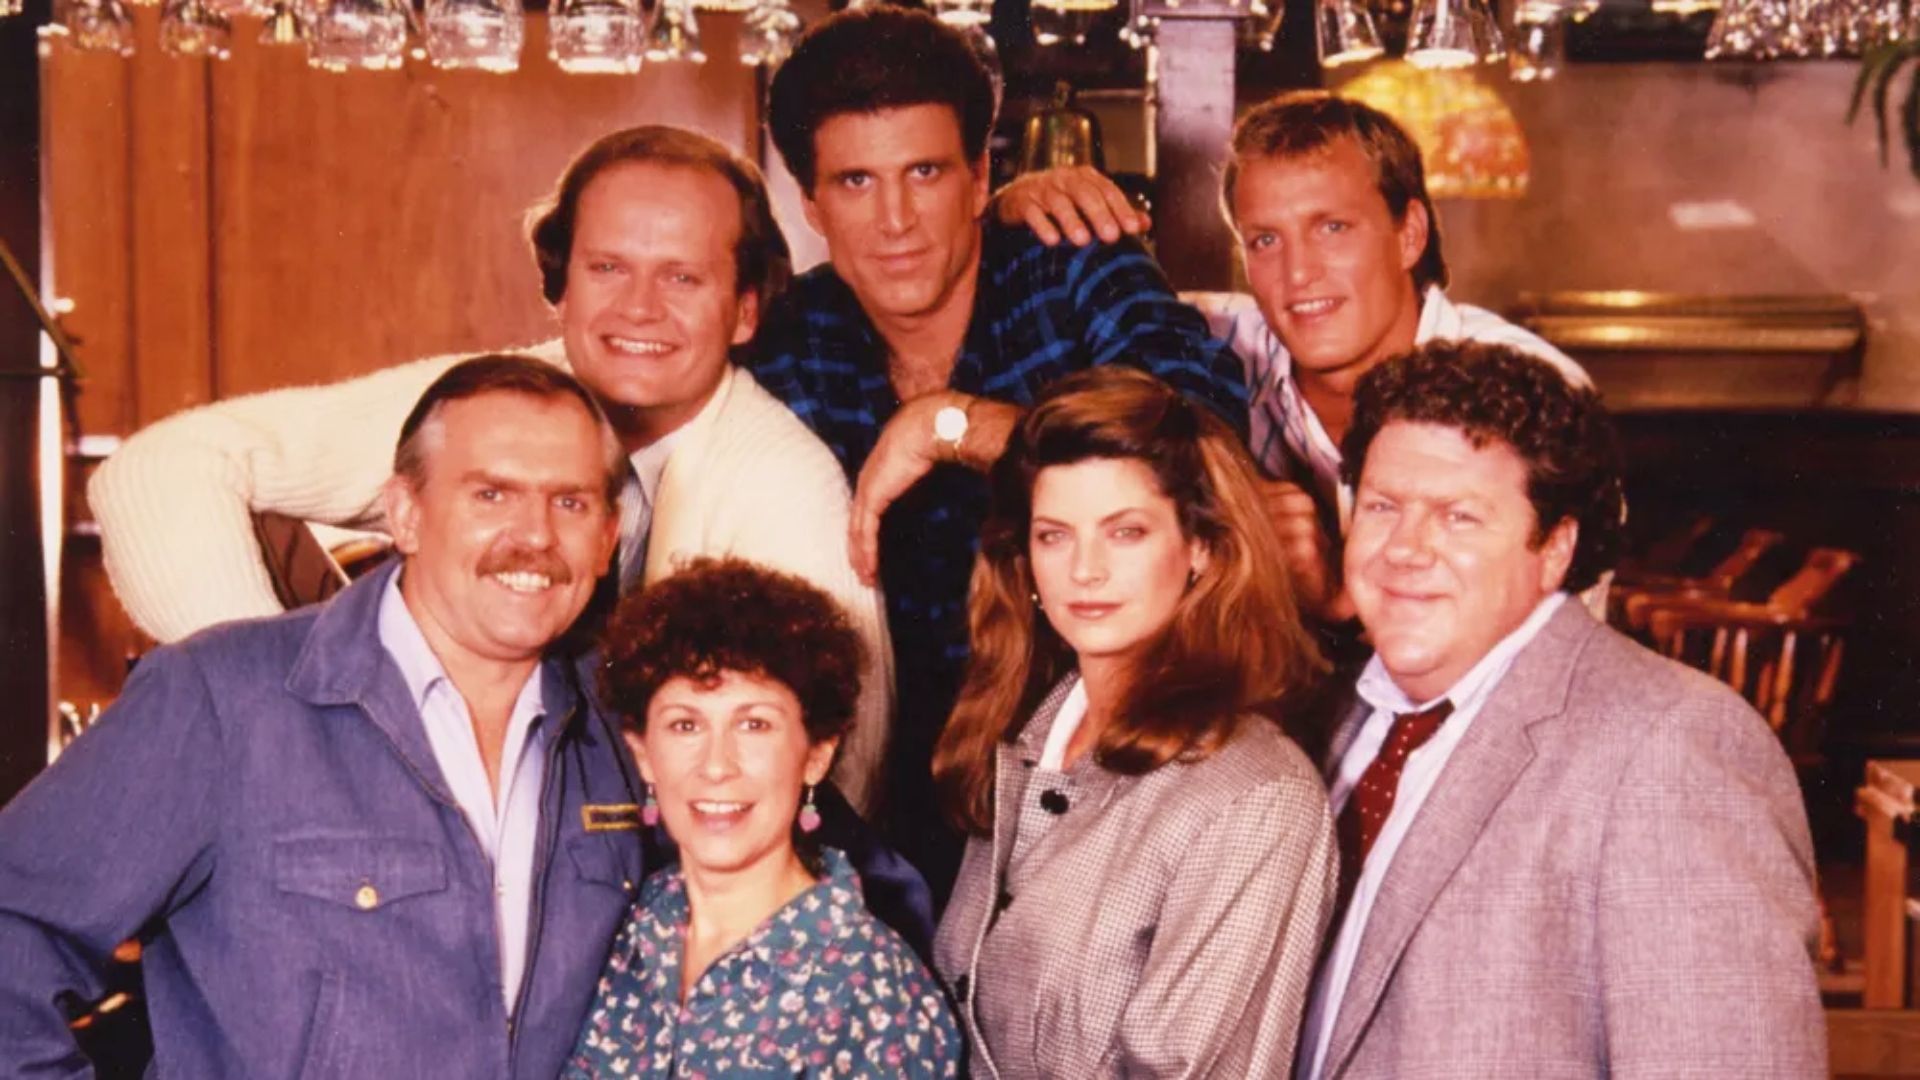 The cast of the sitcom Cheers